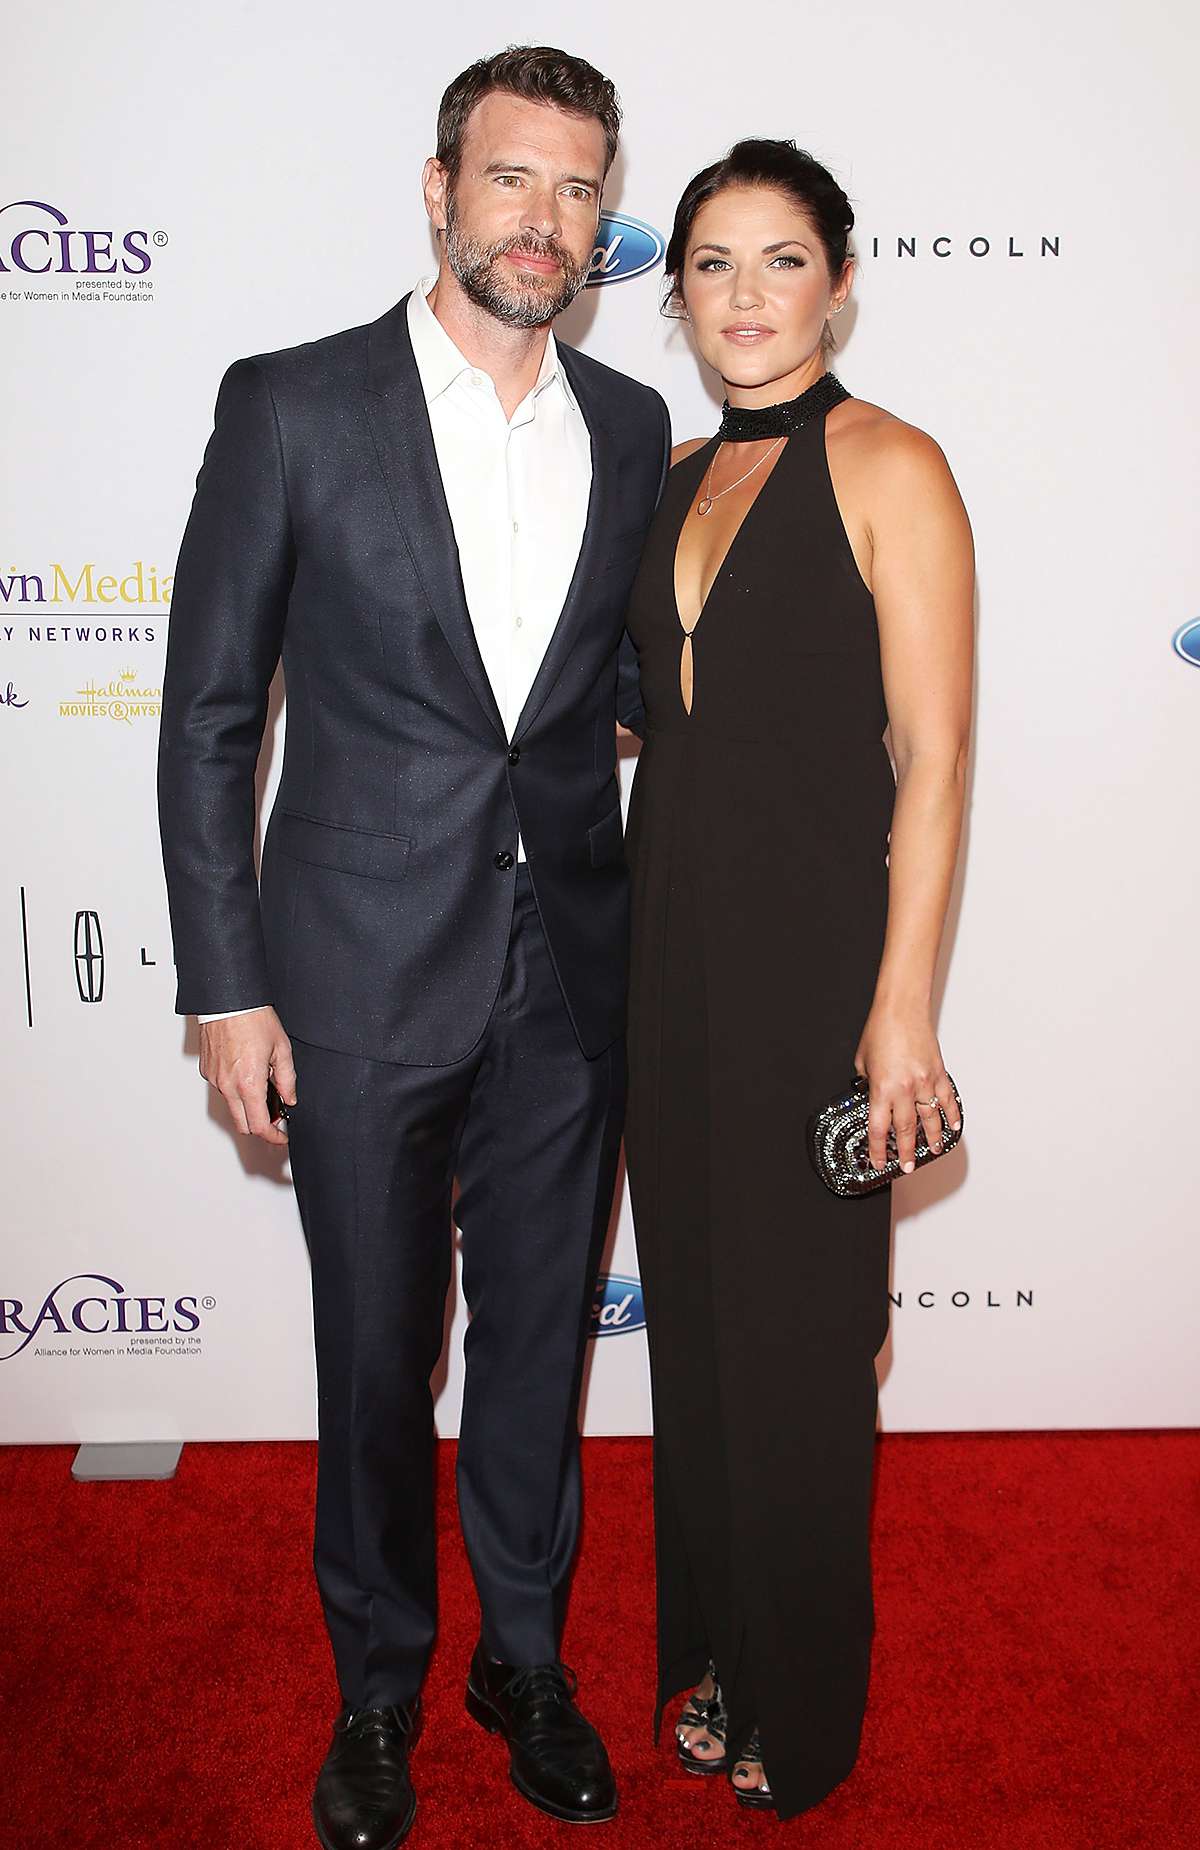 Scott Foley and Marika Dominczyk arrive at the 41st Annual Gracie Awards Gala held at the Beverly Wilshire Four Seasons Hotel on May 24, 2016 in Beverly Hills, California.